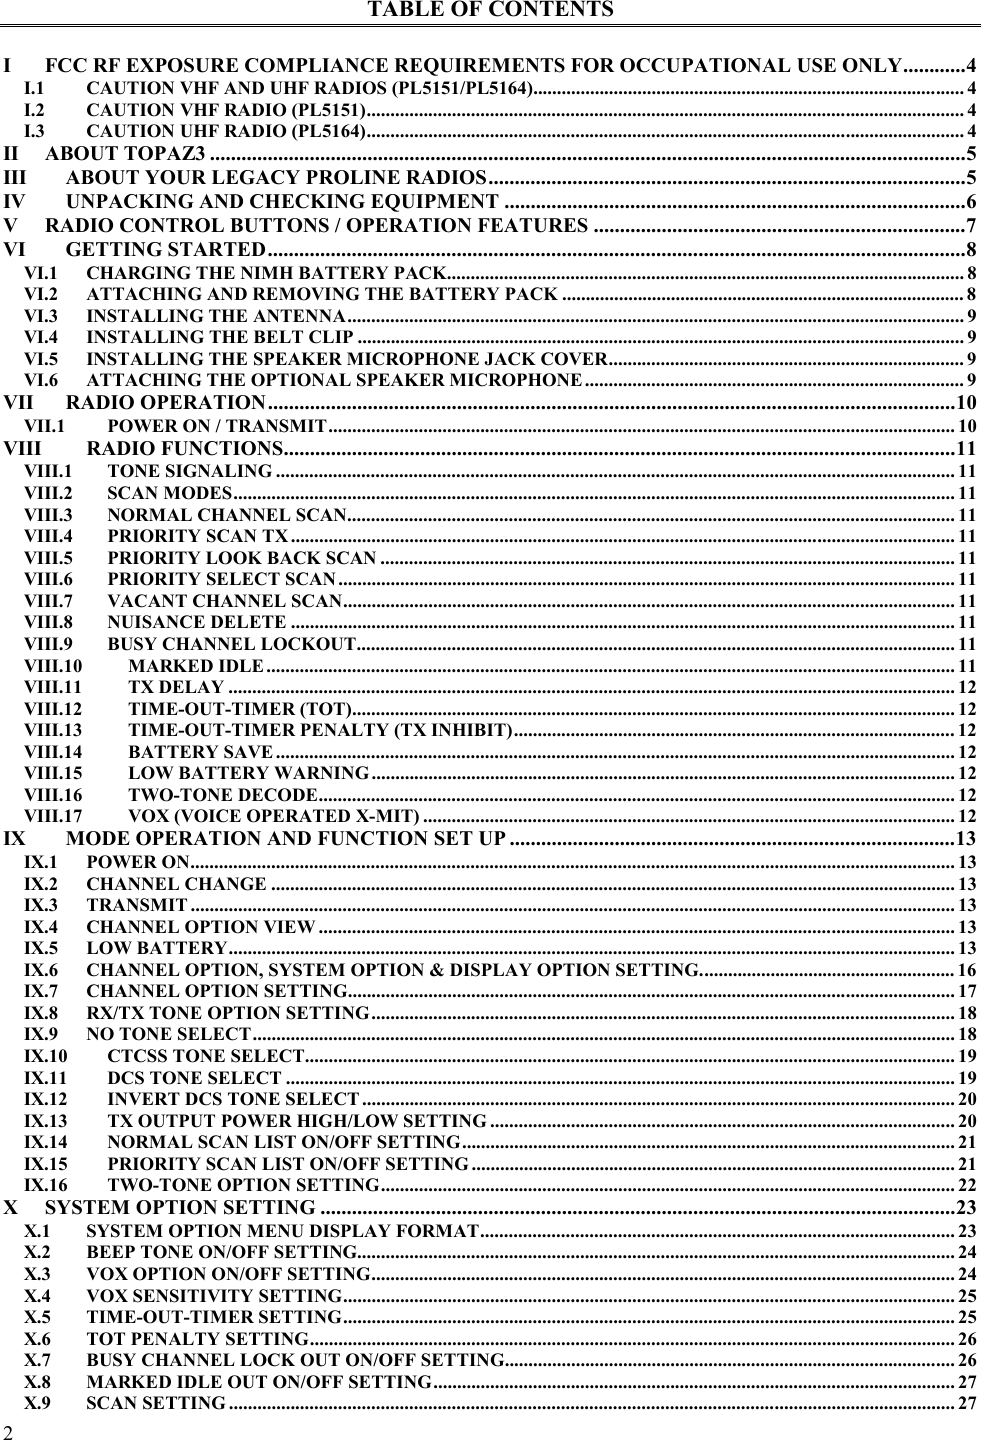  2   TABLE OF CONTENTS  I FCC RF EXPOSURE COMPLIANCE REQUIREMENTS FOR OCCUPATIONAL USE ONLY............4 I.1 CAUTION VHF AND UHF RADIOS (PL5151/PL5164)........................................................................................... 4 I.2 CAUTION VHF RADIO (PL5151).............................................................................................................................. 4 I.3 CAUTION UHF RADIO (PL5164).............................................................................................................................. 4 II ABOUT TOPAZ3 ................................................................................................................................................5 III ABOUT YOUR LEGACY PROLINE RADIOS...........................................................................................5 IV UNPACKING AND CHECKING EQUIPMENT ........................................................................................6 V RADIO CONTROL BUTTONS / OPERATION FEATURES .......................................................................7 VI GETTING STARTED.....................................................................................................................................8 VI.1 CHARGING THE NIMH BATTERY PACK............................................................................................................. 8 VI.2 ATTACHING AND REMOVING THE BATTERY PACK ..................................................................................... 8 VI.3 INSTALLING THE ANTENNA.................................................................................................................................. 9 VI.4 INSTALLING THE BELT CLIP ................................................................................................................................ 9 VI.5 INSTALLING THE SPEAKER MICROPHONE JACK COVER........................................................................... 9 VI.6 ATTACHING THE OPTIONAL SPEAKER MICROPHONE................................................................................ 9 VII RADIO OPERATION...................................................................................................................................10 VII.1 POWER ON / TRANSMIT.................................................................................................................................... 10 VIII RADIO FUNCTIONS................................................................................................................................11 VIII.1 TONE SIGNALING ............................................................................................................................................... 11 VIII.2 SCAN MODES........................................................................................................................................................ 11 VIII.3 NORMAL CHANNEL SCAN................................................................................................................................ 11 VIII.4 PRIORITY SCAN TX ............................................................................................................................................ 11 VIII.5 PRIORITY LOOK BACK SCAN ......................................................................................................................... 11 VIII.6 PRIORITY SELECT SCAN .................................................................................................................................. 11 VIII.7 VACANT CHANNEL SCAN................................................................................................................................. 11 VIII.8 NUISANCE DELETE ............................................................................................................................................ 11 VIII.9 BUSY CHANNEL LOCKOUT.............................................................................................................................. 11 VIII.10 MARKED IDLE................................................................................................................................................. 11 VIII.11 TX DELAY ......................................................................................................................................................... 12 VIII.12 TIME-OUT-TIMER (TOT)............................................................................................................................... 12 VIII.13 TIME-OUT-TIMER PENALTY (TX INHIBIT)............................................................................................. 12 VIII.14 BATTERY SAVE............................................................................................................................................... 12 VIII.15 LOW BATTERY WARNING ........................................................................................................................... 12 VIII.16 TWO-TONE DECODE...................................................................................................................................... 12 VIII.17 VOX (VOICE OPERATED X-MIT) ................................................................................................................ 12 IX MODE OPERATION AND FUNCTION SET UP .....................................................................................13 IX.1 POWER ON................................................................................................................................................................. 13 IX.2 CHANNEL CHANGE ................................................................................................................................................ 13 IX.3 TRANSMIT ................................................................................................................................................................. 13 IX.4 CHANNEL OPTION VIEW ...................................................................................................................................... 13 IX.5 LOW BATTERY......................................................................................................................................................... 13 IX.6 CHANNEL OPTION, SYSTEM OPTION &amp; DISPLAY OPTION SETTING...................................................... 16 IX.7 CHANNEL OPTION SETTING................................................................................................................................ 17 IX.8 RX/TX TONE OPTION SETTING........................................................................................................................... 18 IX.9 NO TONE SELECT.................................................................................................................................................... 18 IX.10 CTCSS TONE SELECT......................................................................................................................................... 19 IX.11 DCS TONE SELECT ............................................................................................................................................. 19 IX.12 INVERT DCS TONE SELECT ............................................................................................................................. 20 IX.13 TX OUTPUT POWER HIGH/LOW SETTING .................................................................................................. 20 IX.14 NORMAL SCAN LIST ON/OFF SETTING........................................................................................................ 21 IX.15 PRIORITY SCAN LIST ON/OFF SETTING ...................................................................................................... 21 IX.16 TWO-TONE OPTION SETTING......................................................................................................................... 22 X SYSTEM OPTION SETTING .........................................................................................................................23 X.1 SYSTEM OPTION MENU DISPLAY FORMAT.................................................................................................... 23 X.2 BEEP TONE ON/OFF SETTING.............................................................................................................................. 24 X.3 VOX OPTION ON/OFF SETTING........................................................................................................................... 24 X.4 VOX SENSITIVITY SETTING................................................................................................................................. 25 X.5 TIME-OUT-TIMER SETTING................................................................................................................................. 25 X.6 TOT PENALTY SETTING........................................................................................................................................ 26 X.7 BUSY CHANNEL LOCK OUT ON/OFF SETTING............................................................................................... 26 X.8 MARKED IDLE OUT ON/OFF SETTING.............................................................................................................. 27 X.9 SCAN SETTING ......................................................................................................................................................... 27 